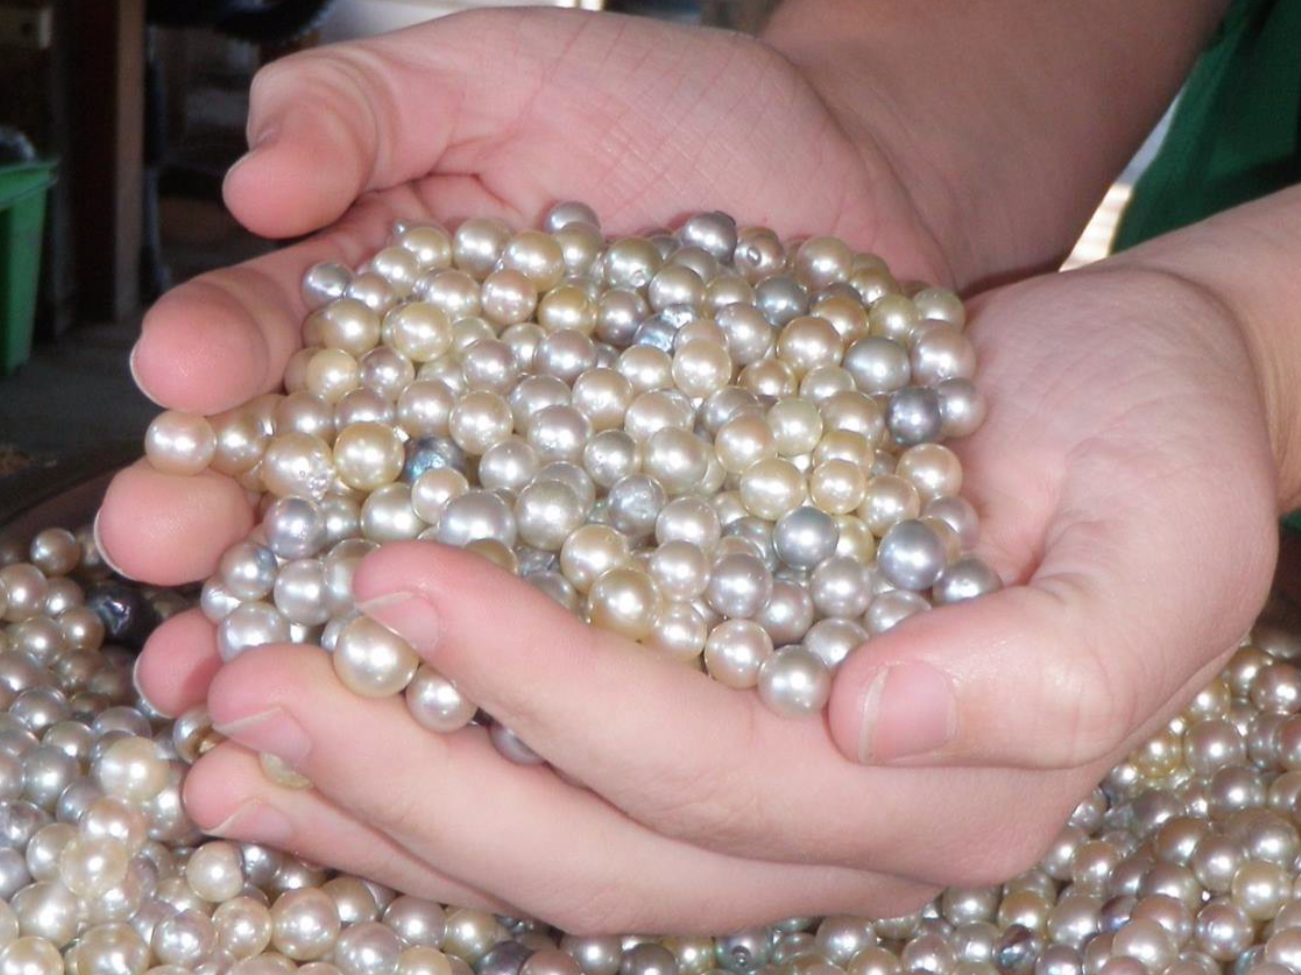 Caring for Pearls Tips